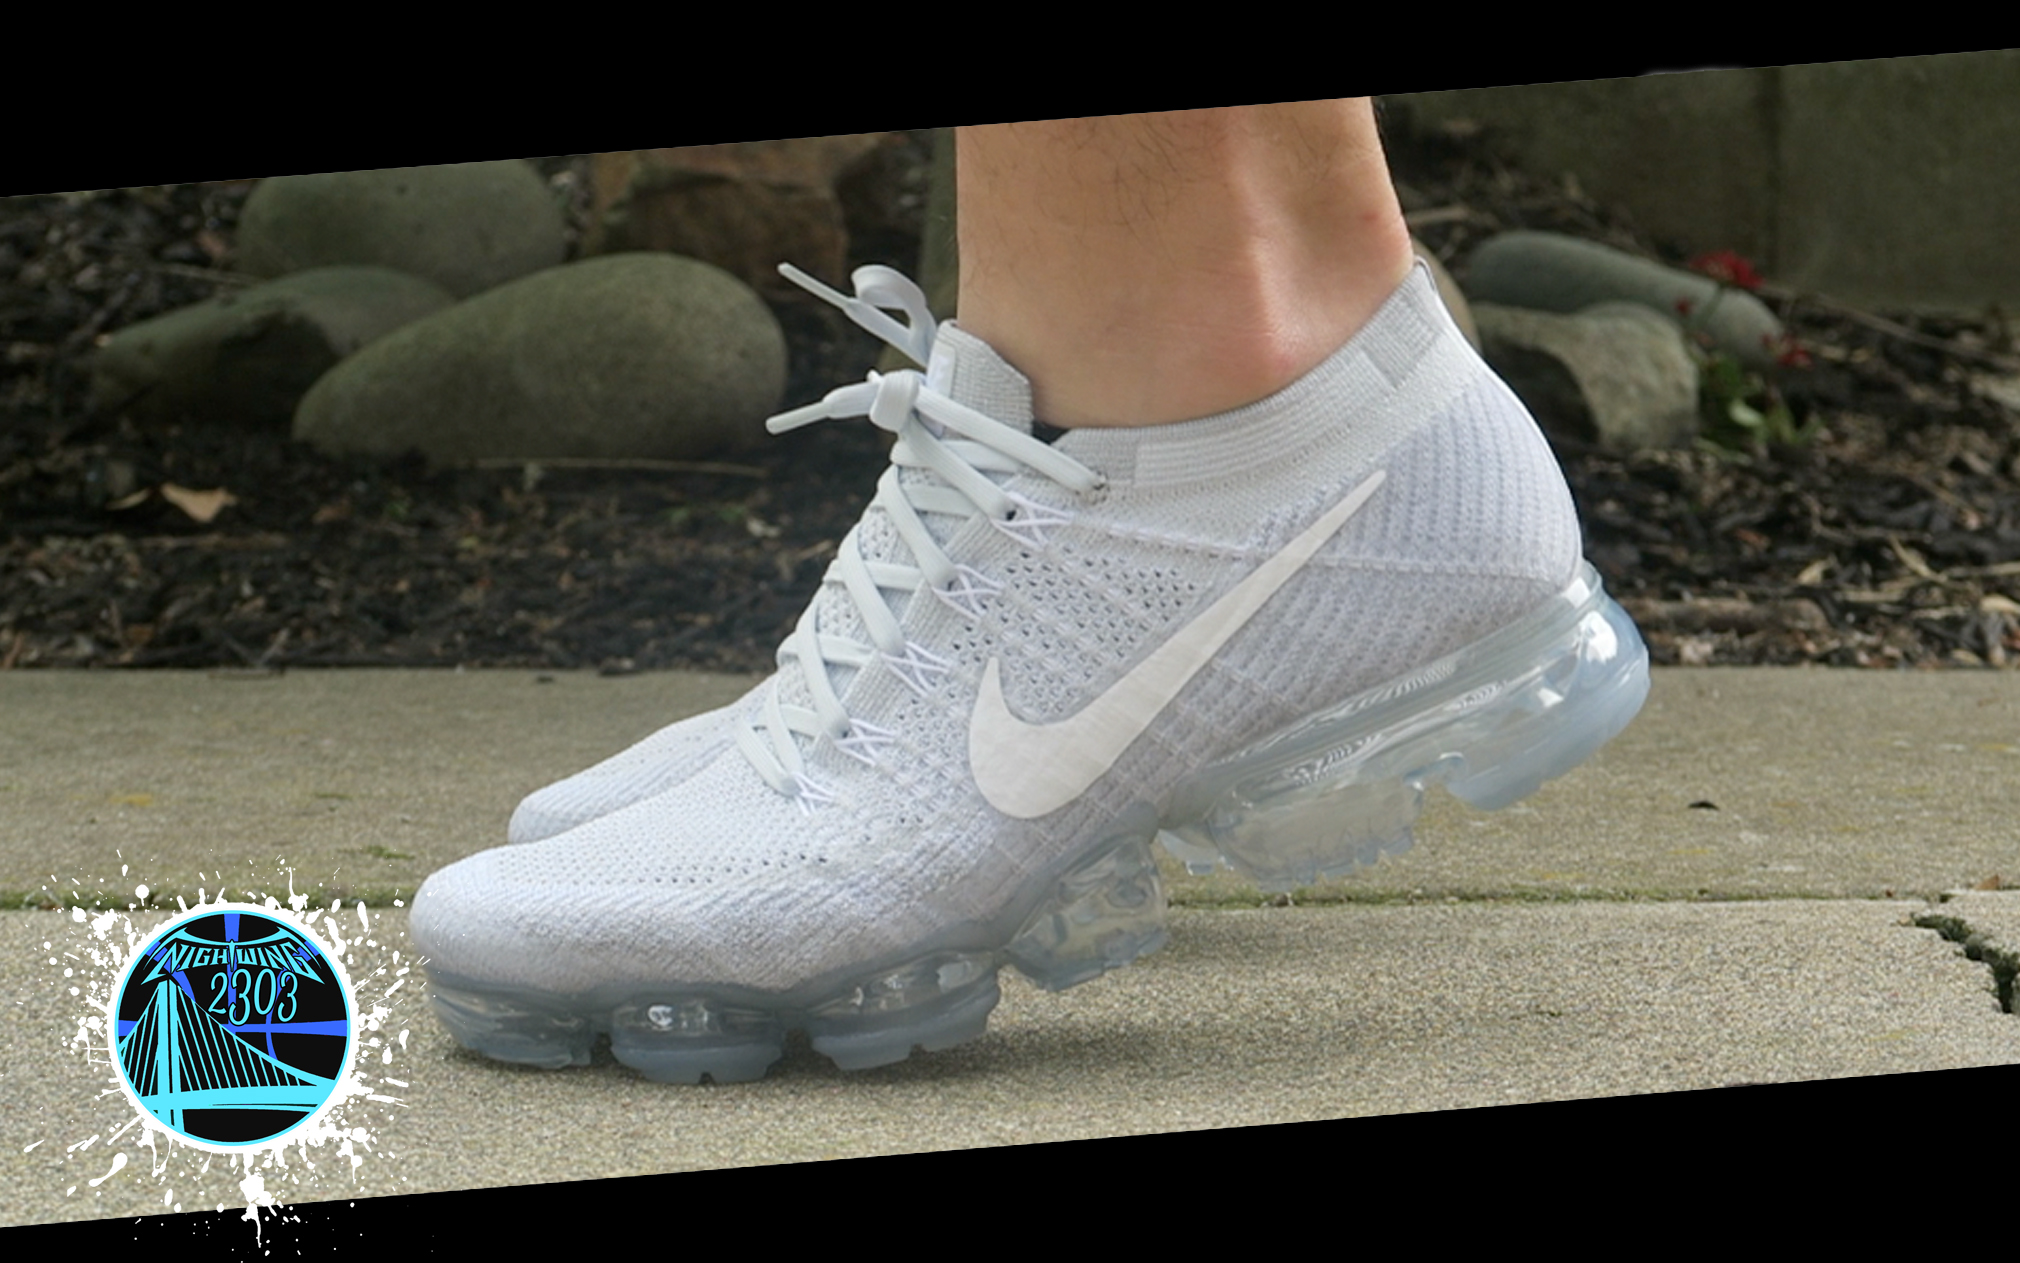 Nike Vapormax 2020 Flyknit Running Review - WearTesters